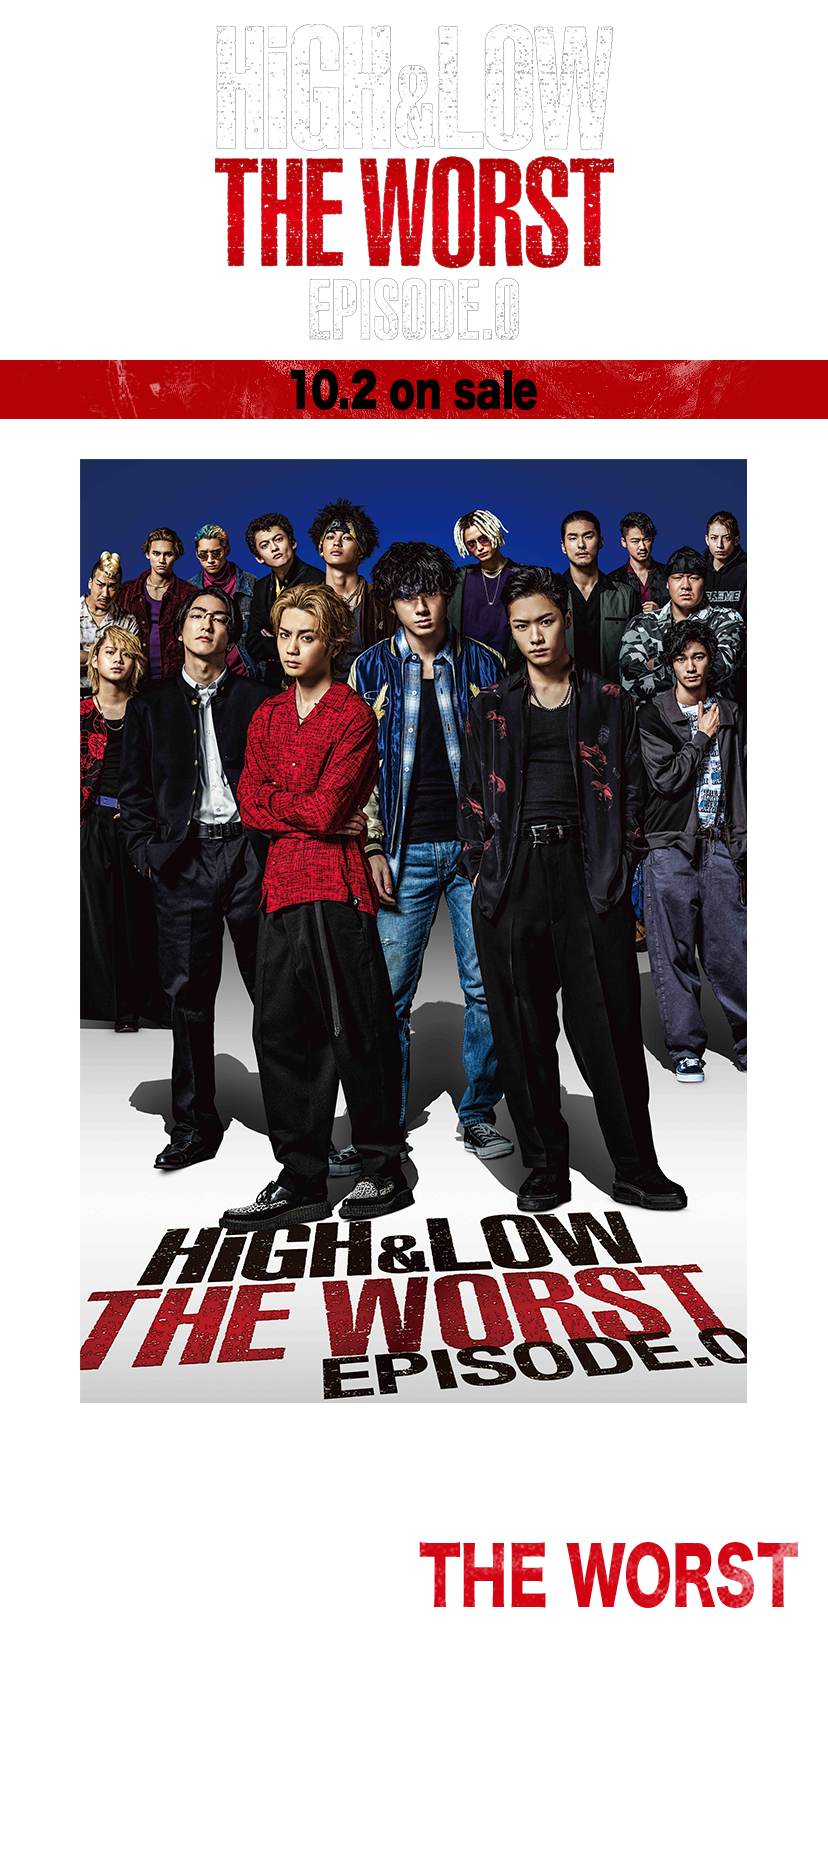 HiGH & LOW THE WORST EPISODE.0　10.2 on sale　シリーズ最新ドラマ「HiGH&LOW THE WORST EPISODE.0」が超最速でDVD/Blu-ray化決定！